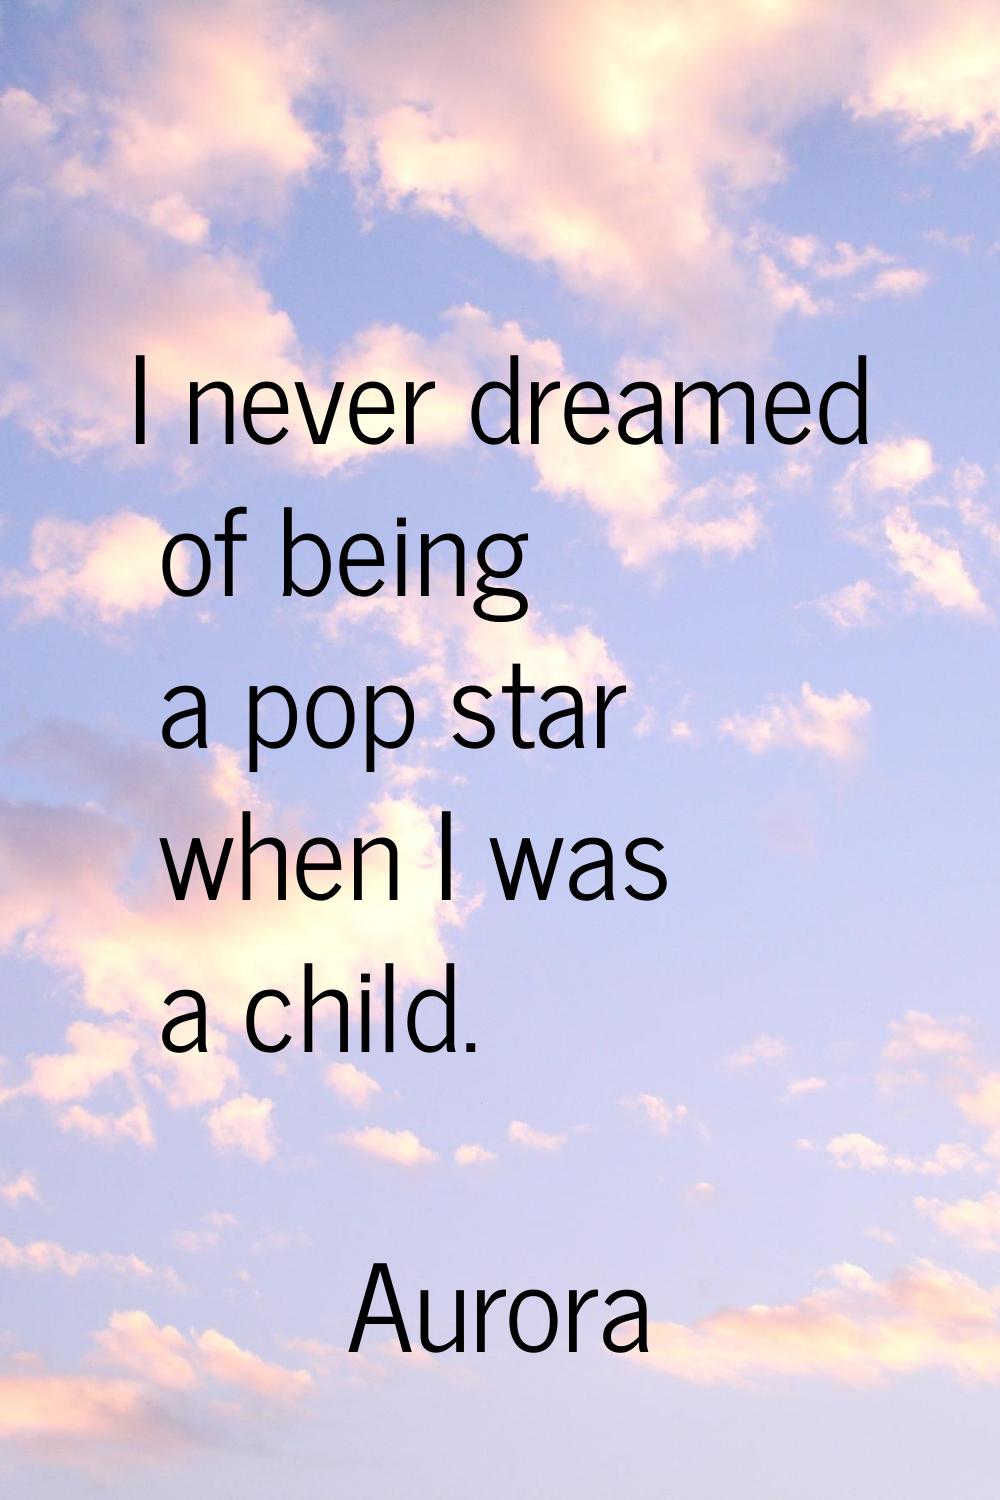 I never dreamed of being a pop star when I was a child.